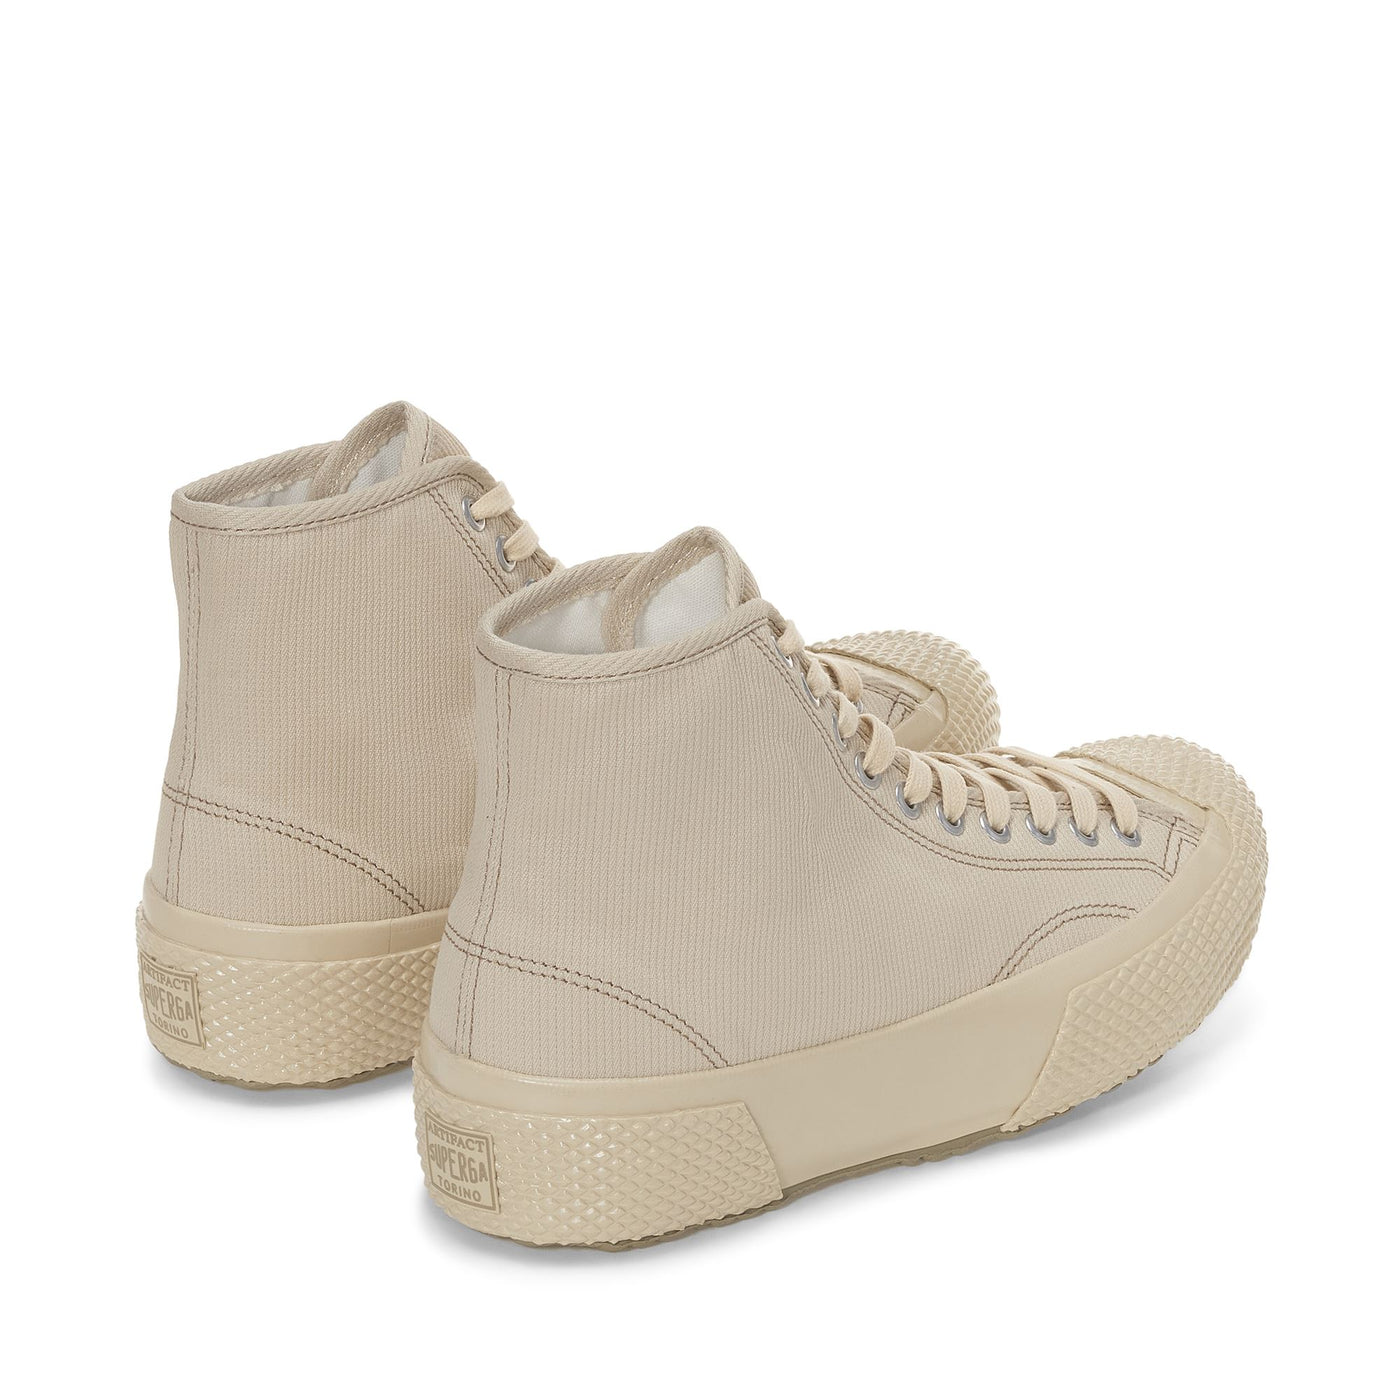 Sneakers Man 2435 MILITARY DECK PIQUE High Cut OFF WHITE-TREE HOUSE Dressed Side (jpg Rgb)		